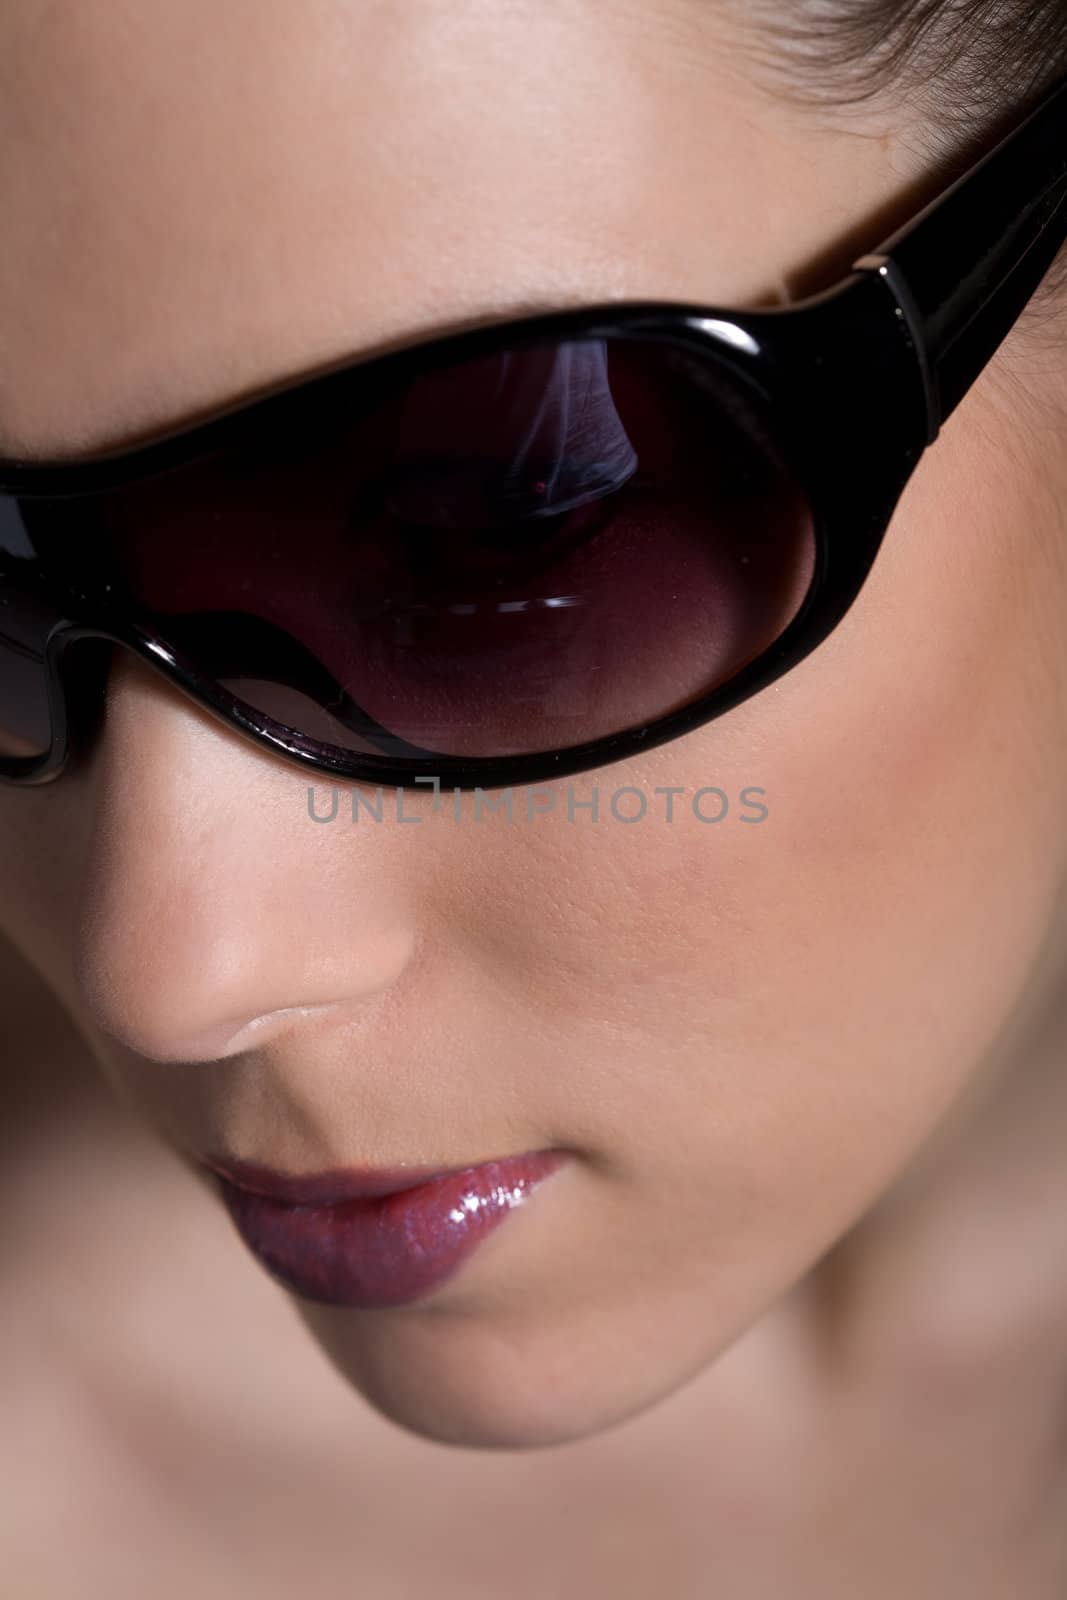 Beauty closeup of woman face with sunglasses